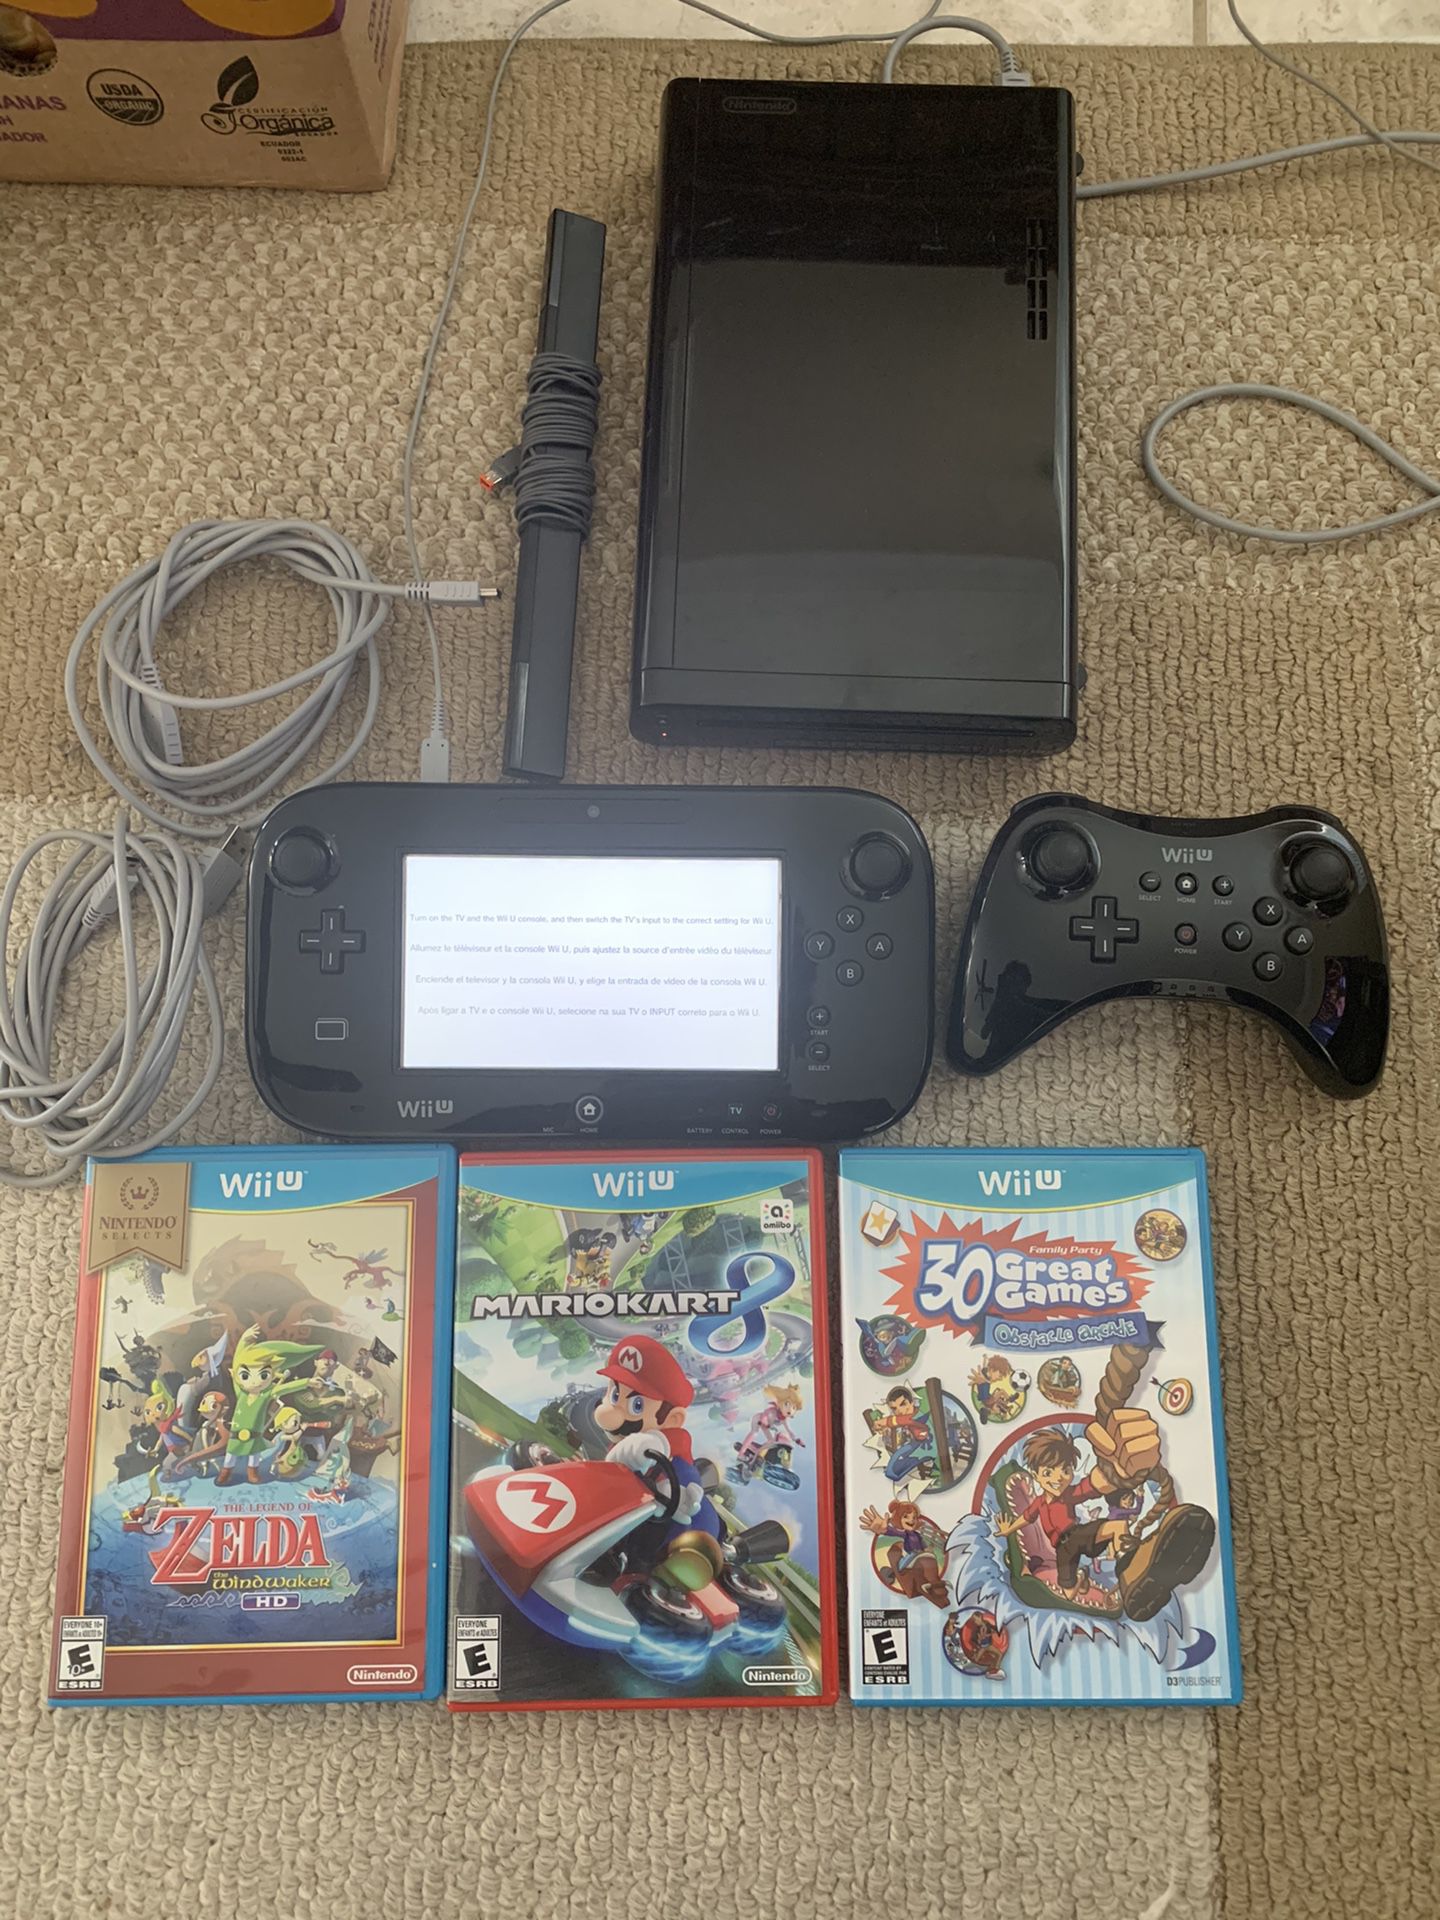 Nintendo Wii U system with 3 games